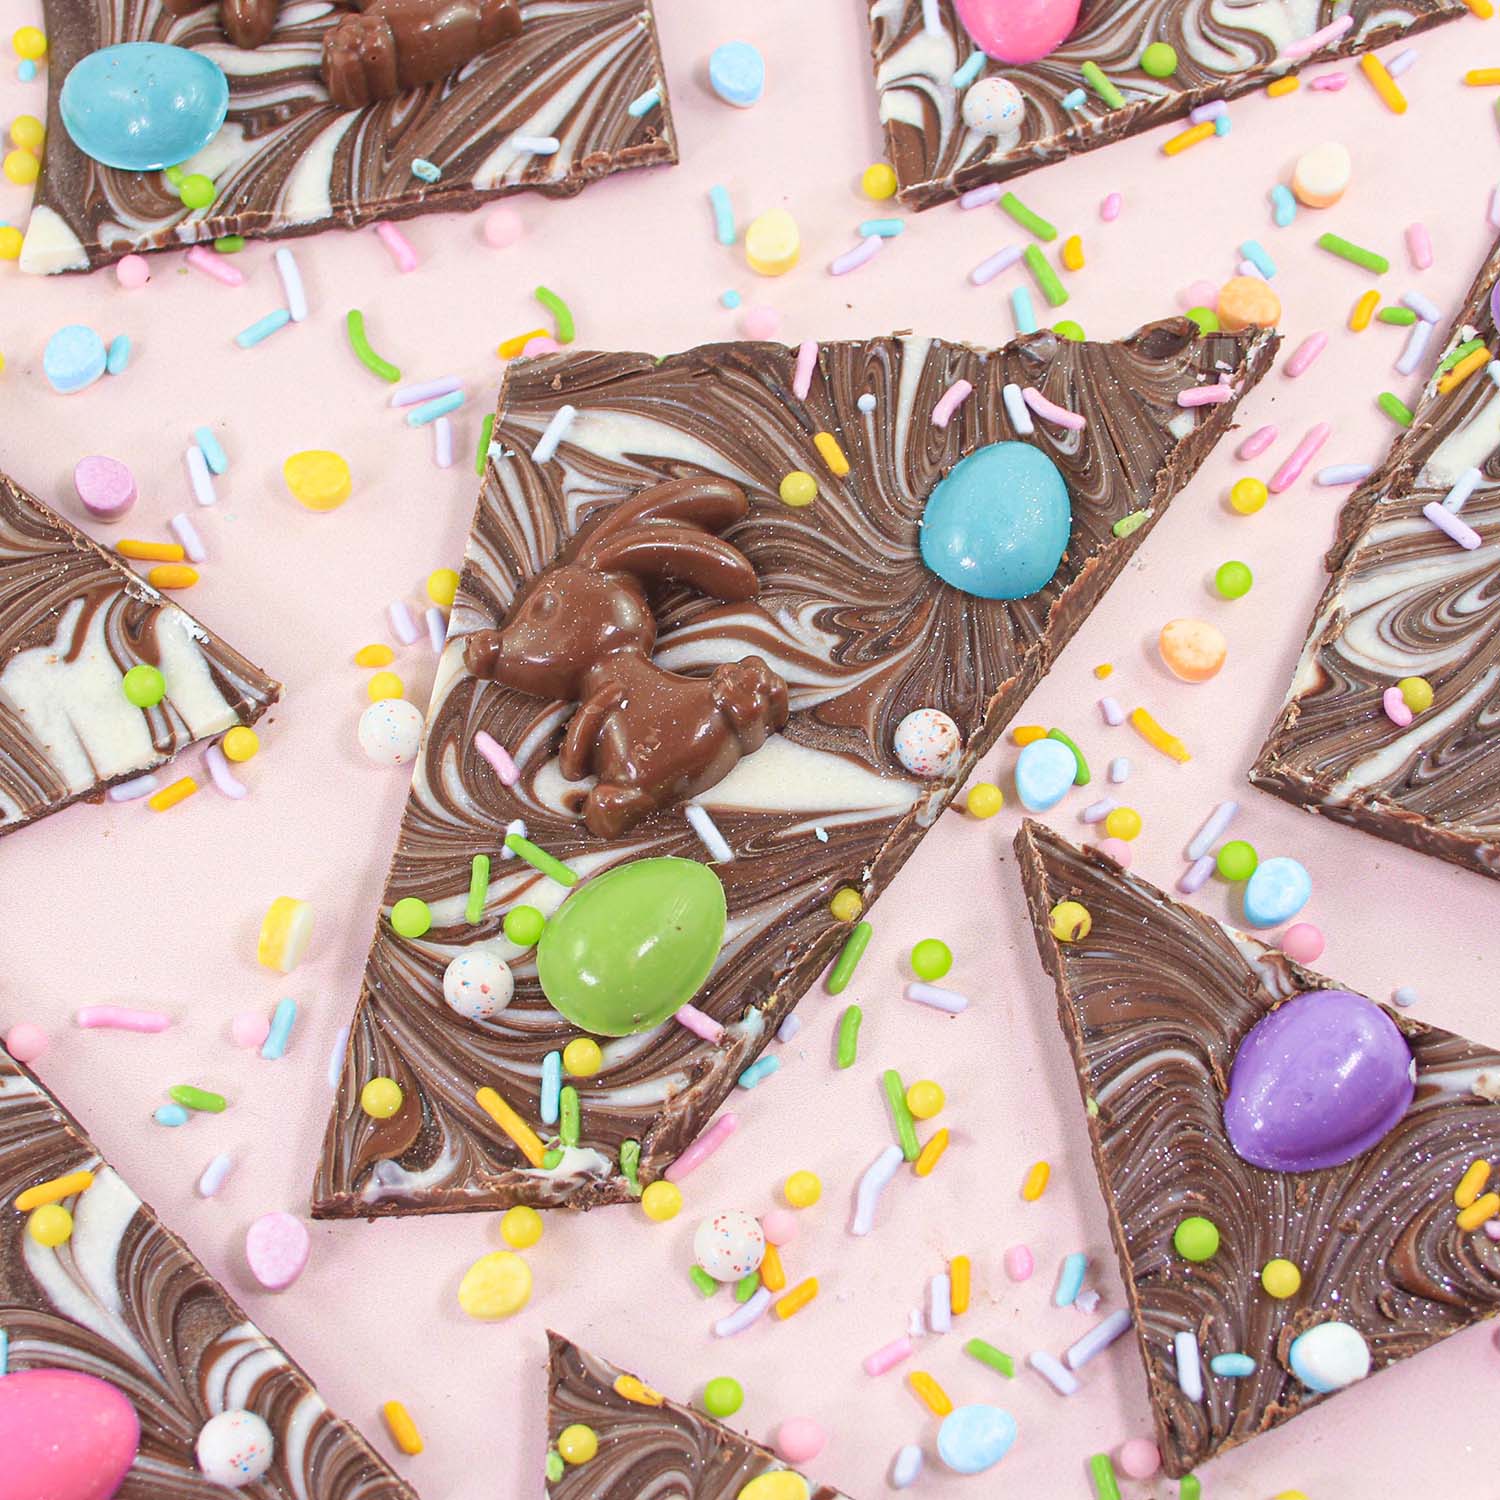 Dark, Milk and White Chocolate swirled together and topped with premade chocolate bunnies and colored chocolate jelly bean eggs and finished with edible glitter